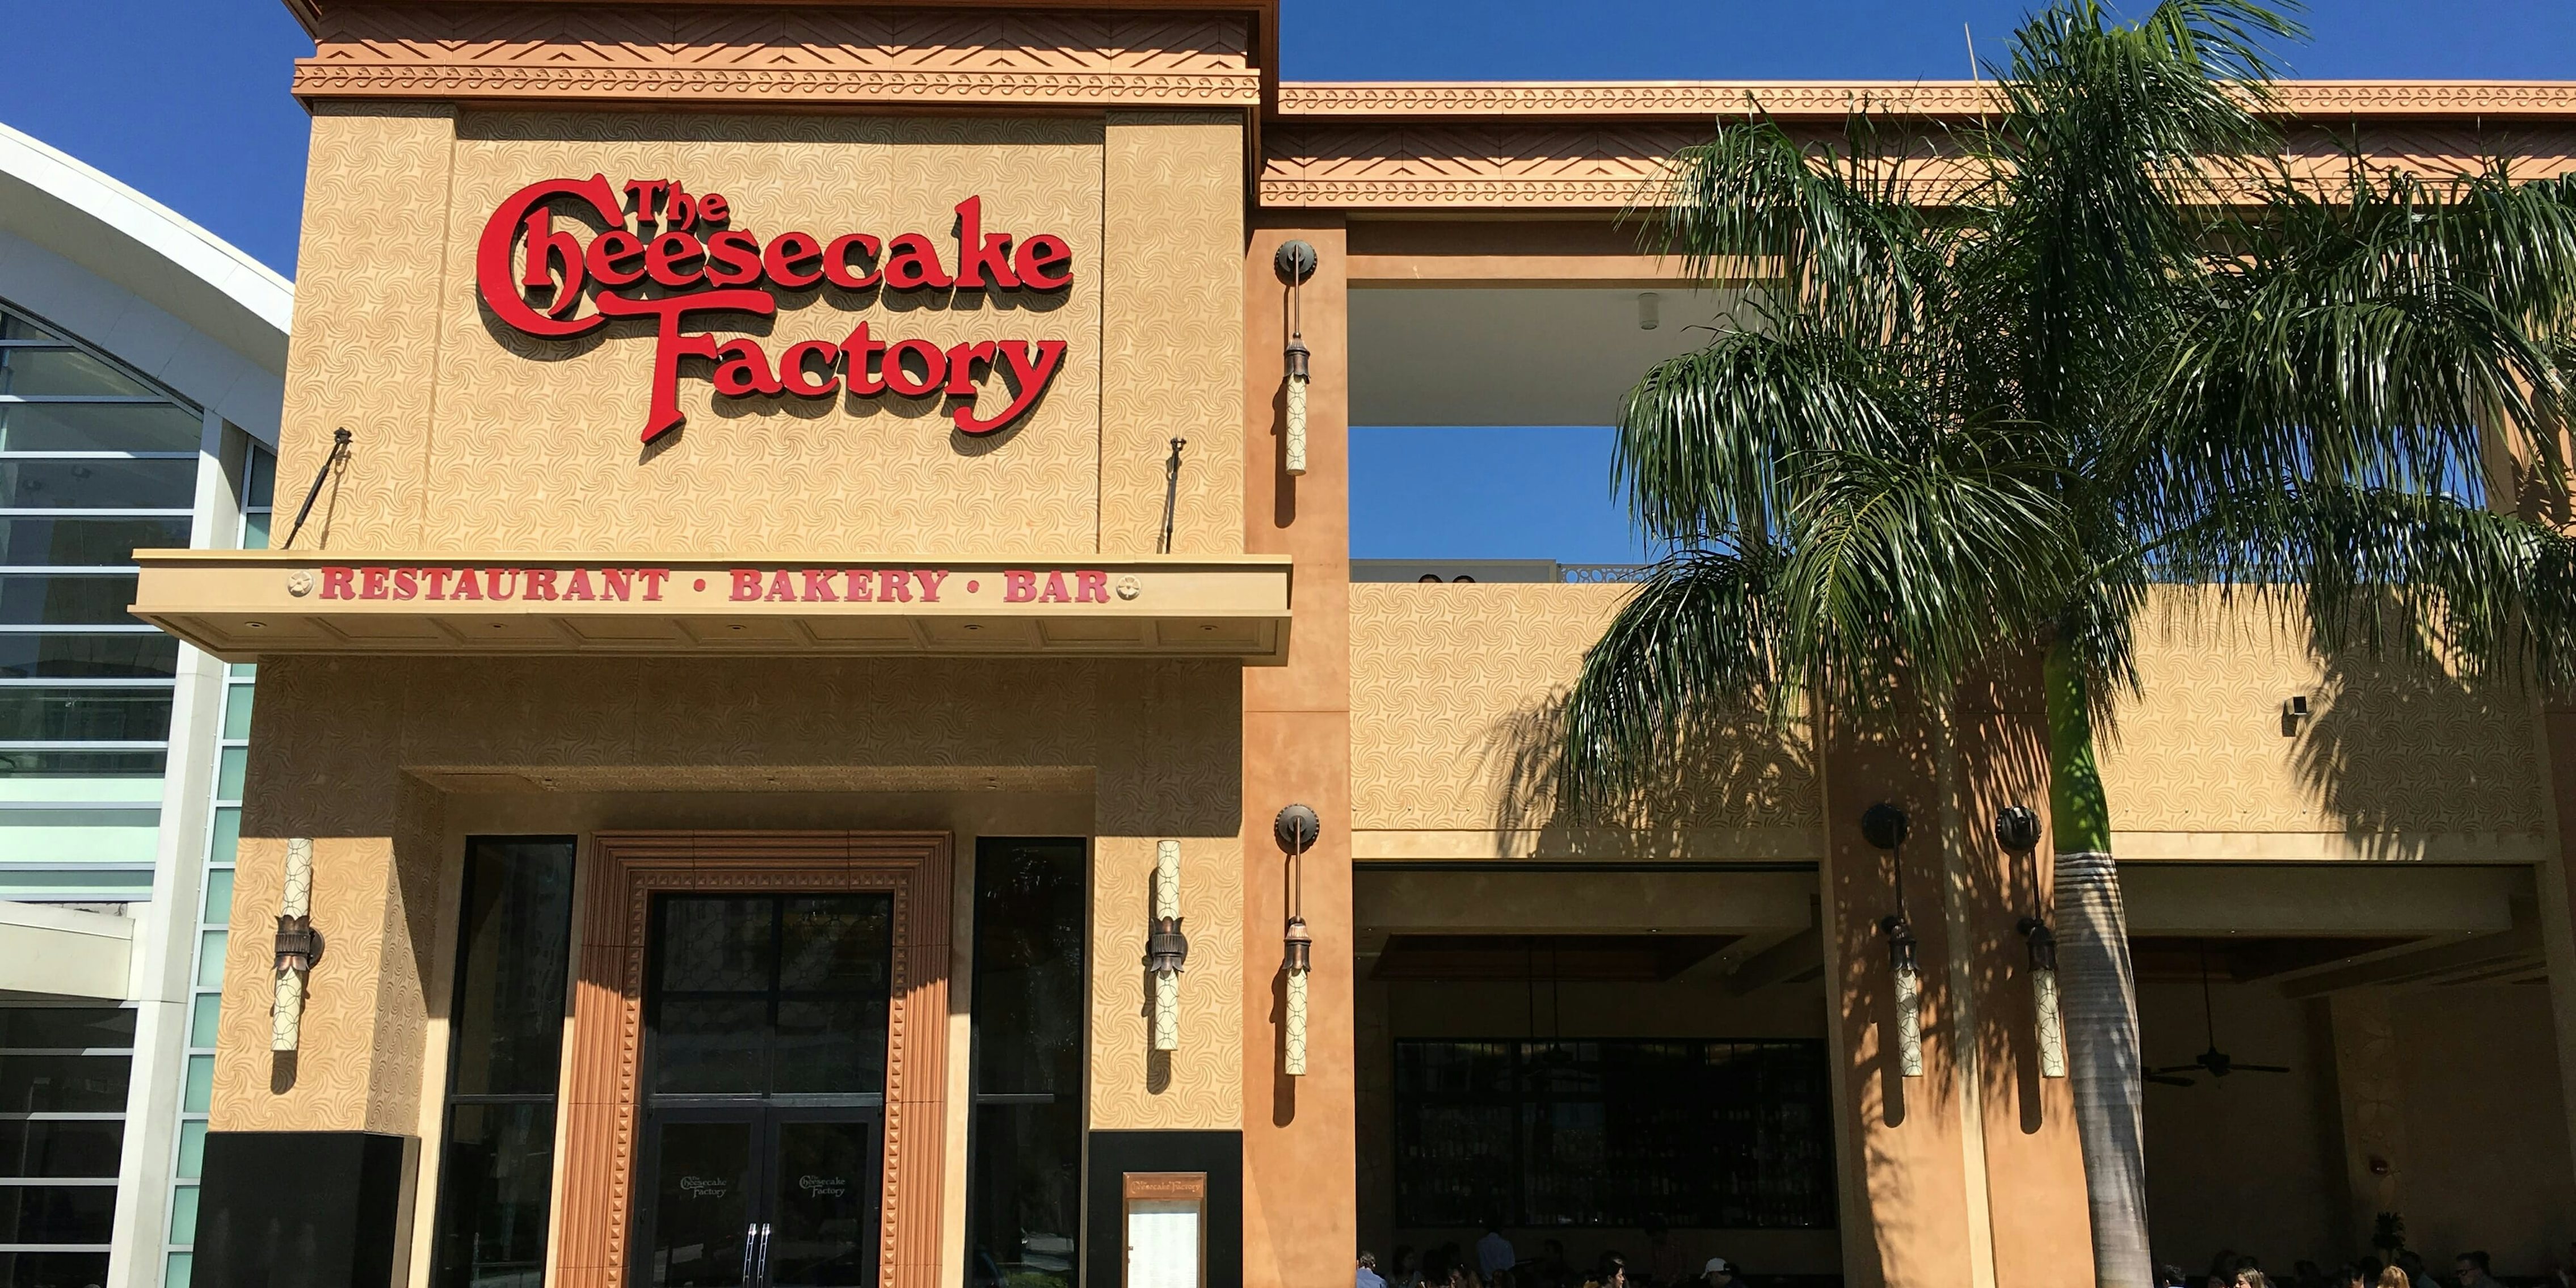 Right-wing Twitter users are boycotting The Cheesecake Factory after one restaurant allegedly teased a customer wearing a MAGA hat.